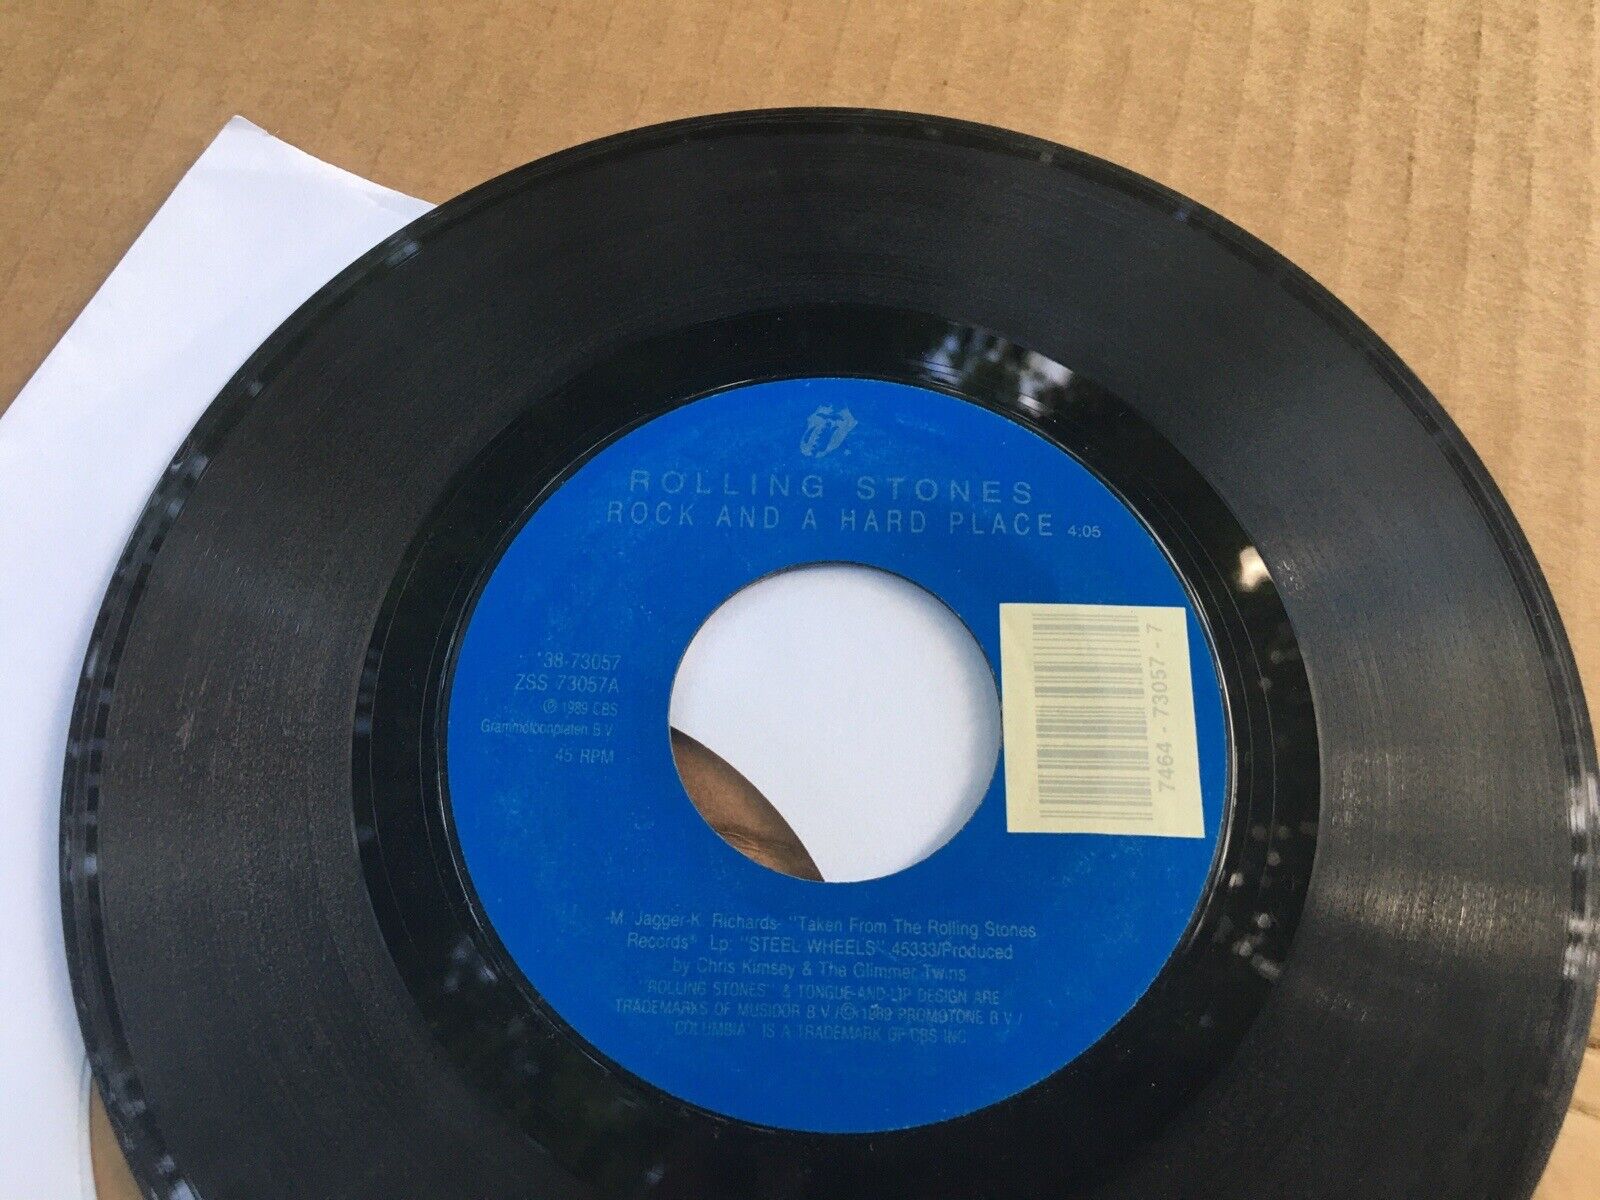 ROLLING STONES ROCK AND A HARD PLACE - COOK COOK BLUES V 45 7  FF1